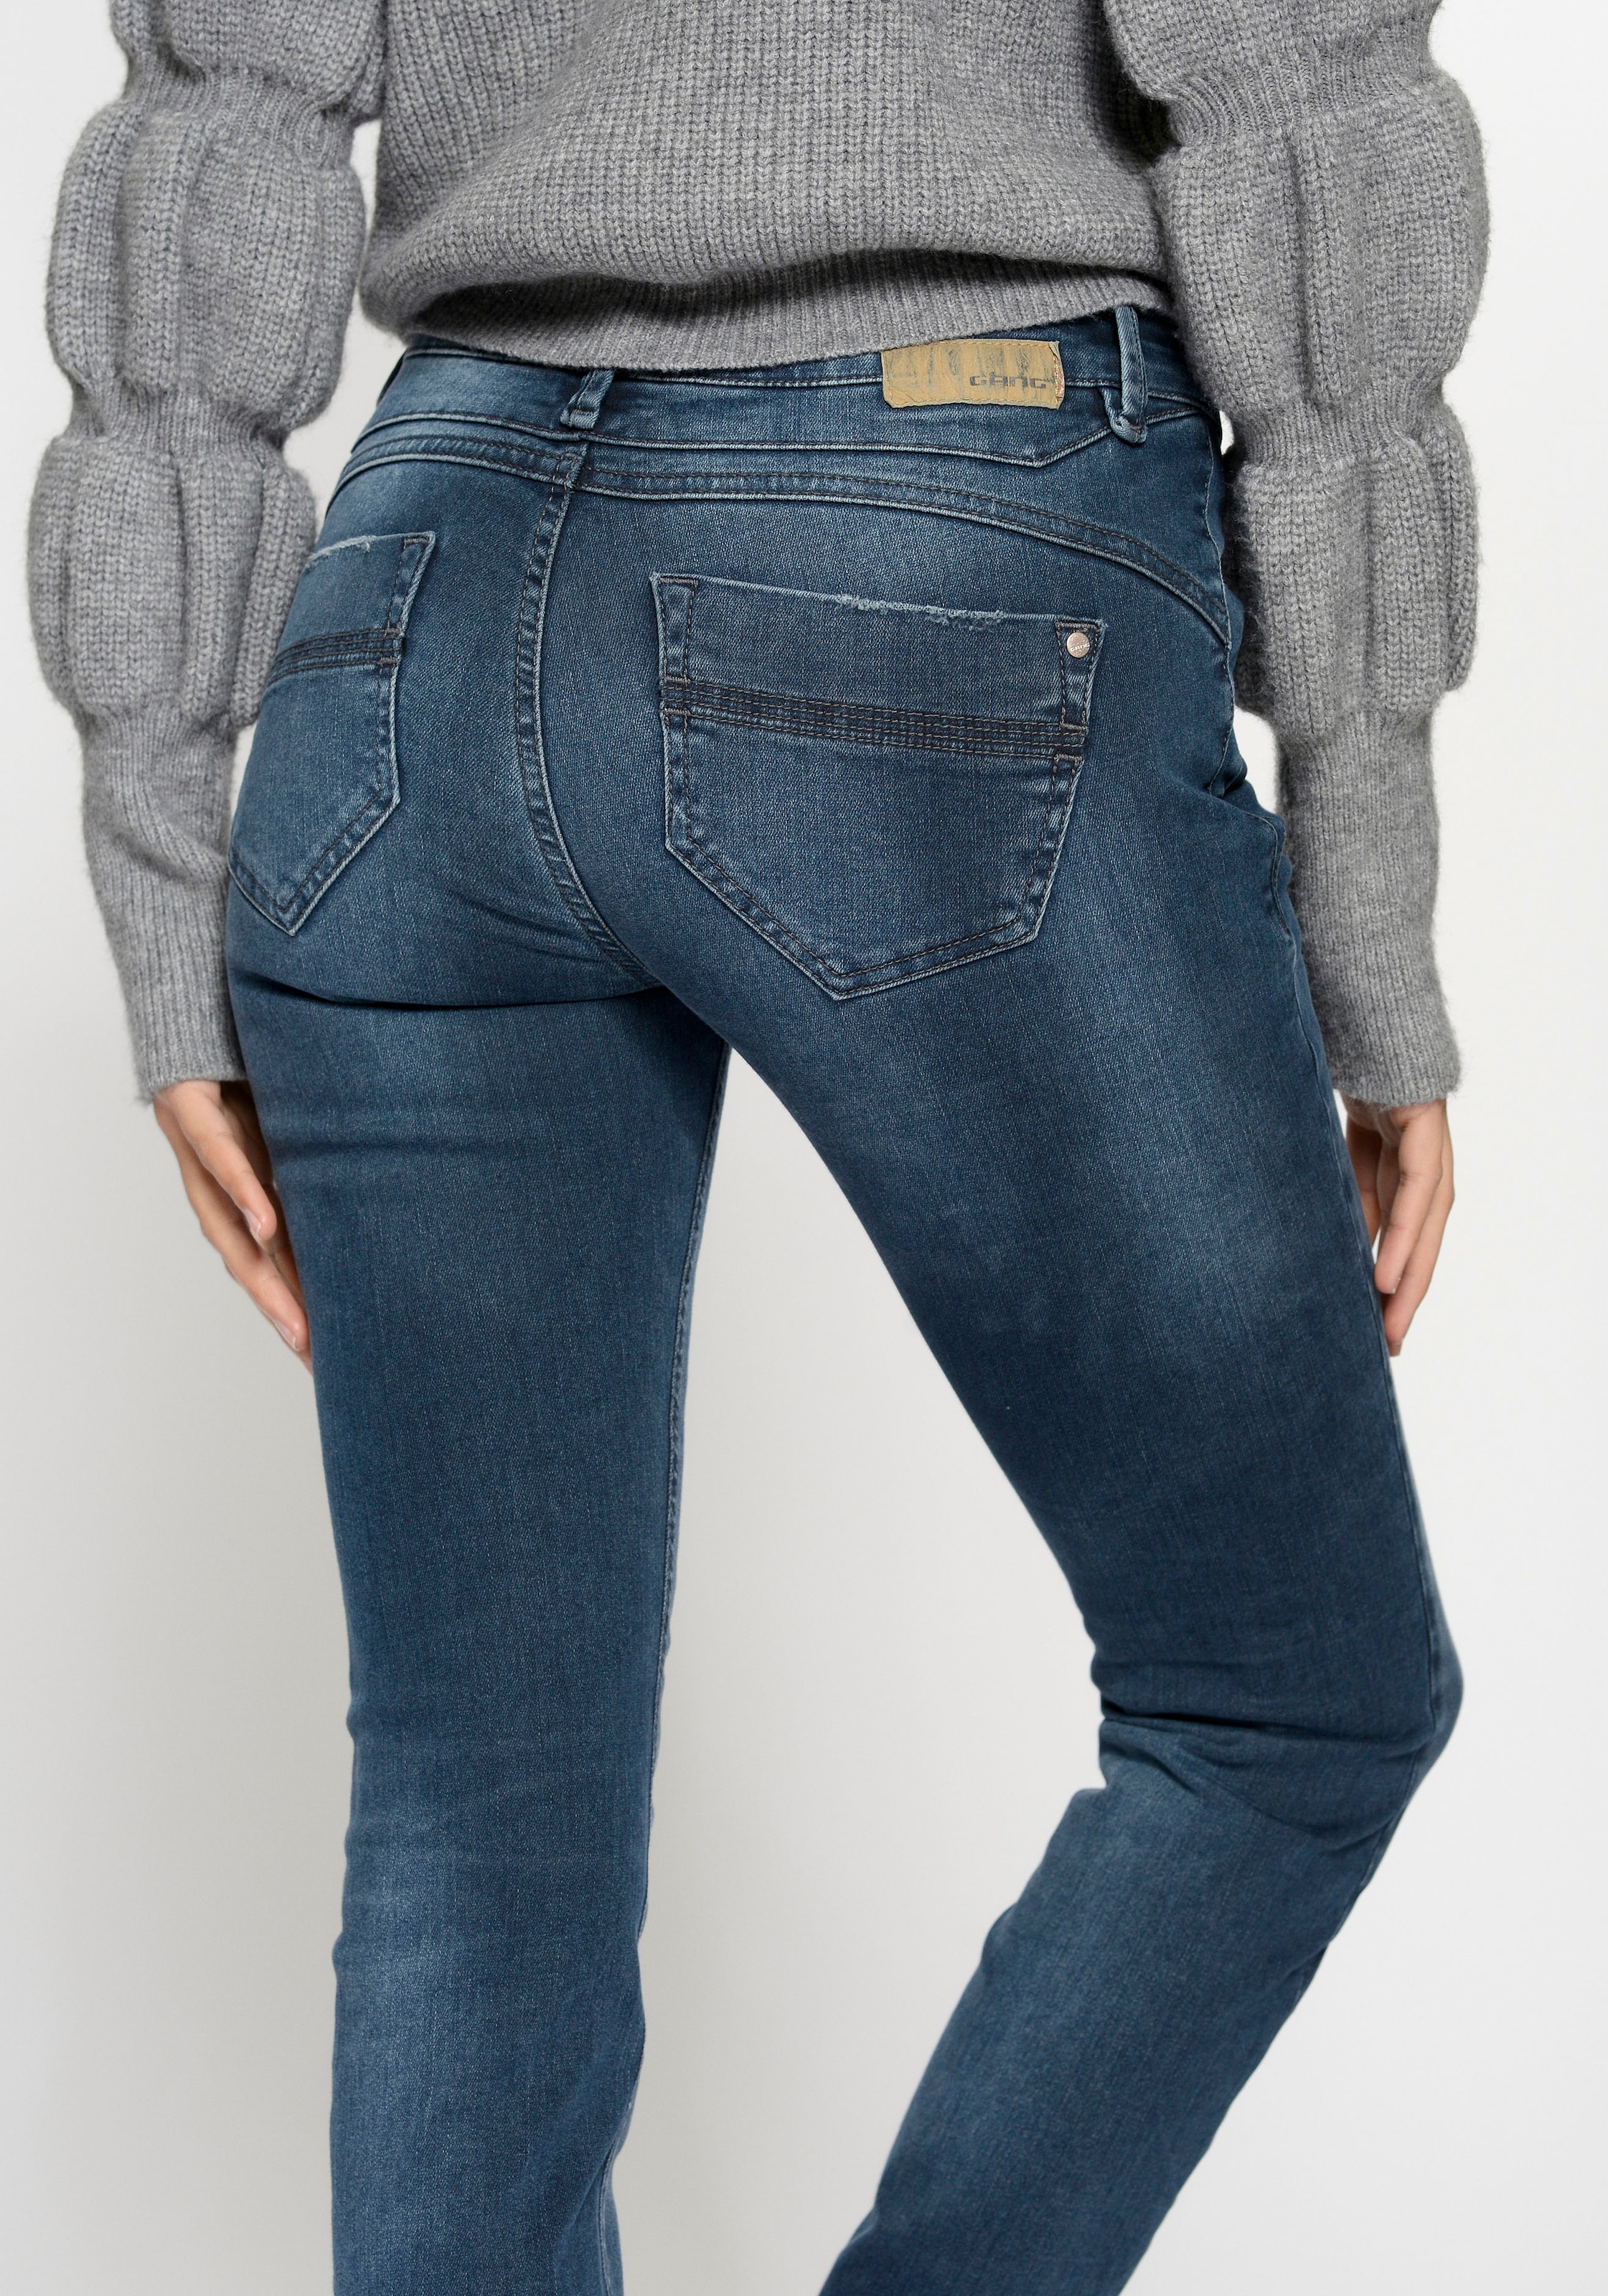 bei Nele« GANG »94 online OTTO Skinny-fit-Jeans